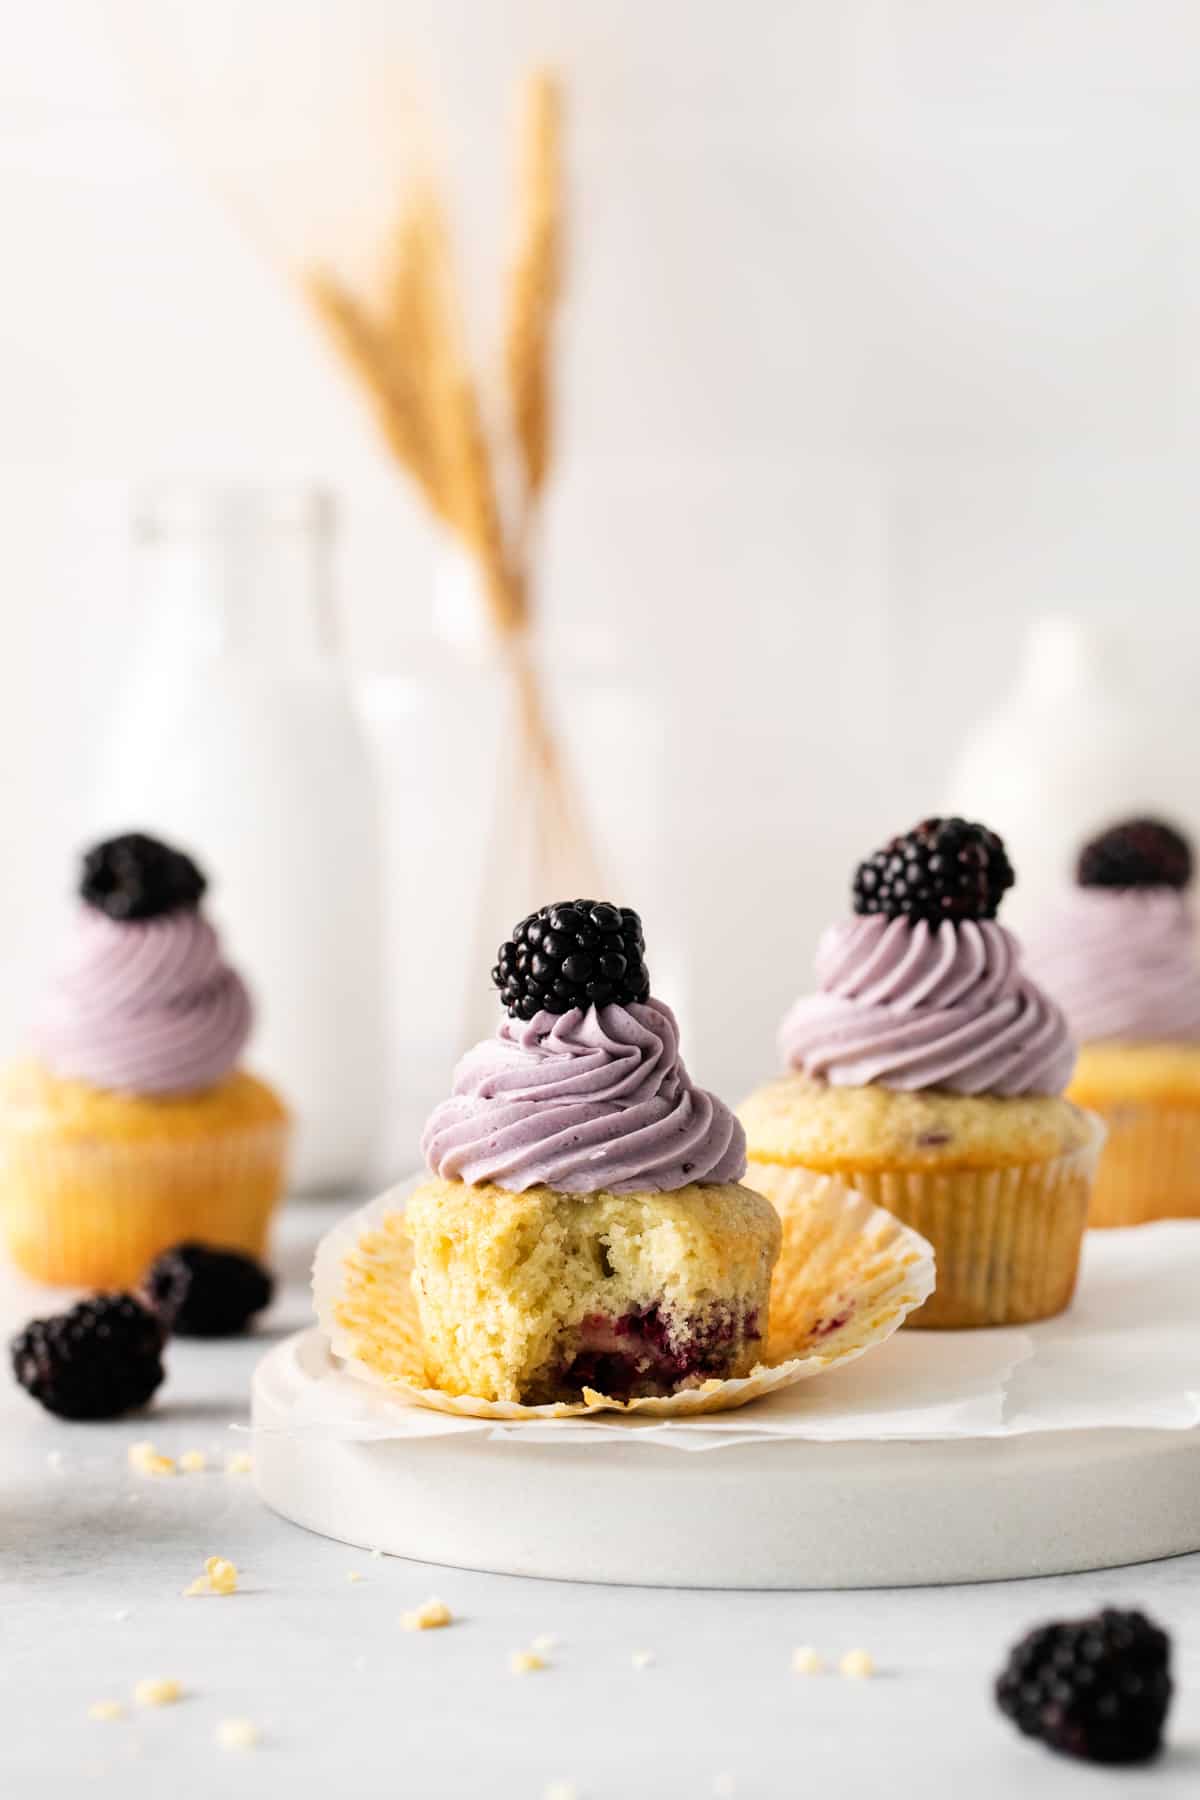 blackberry cupcakes, the one in front has a bite taken out of it